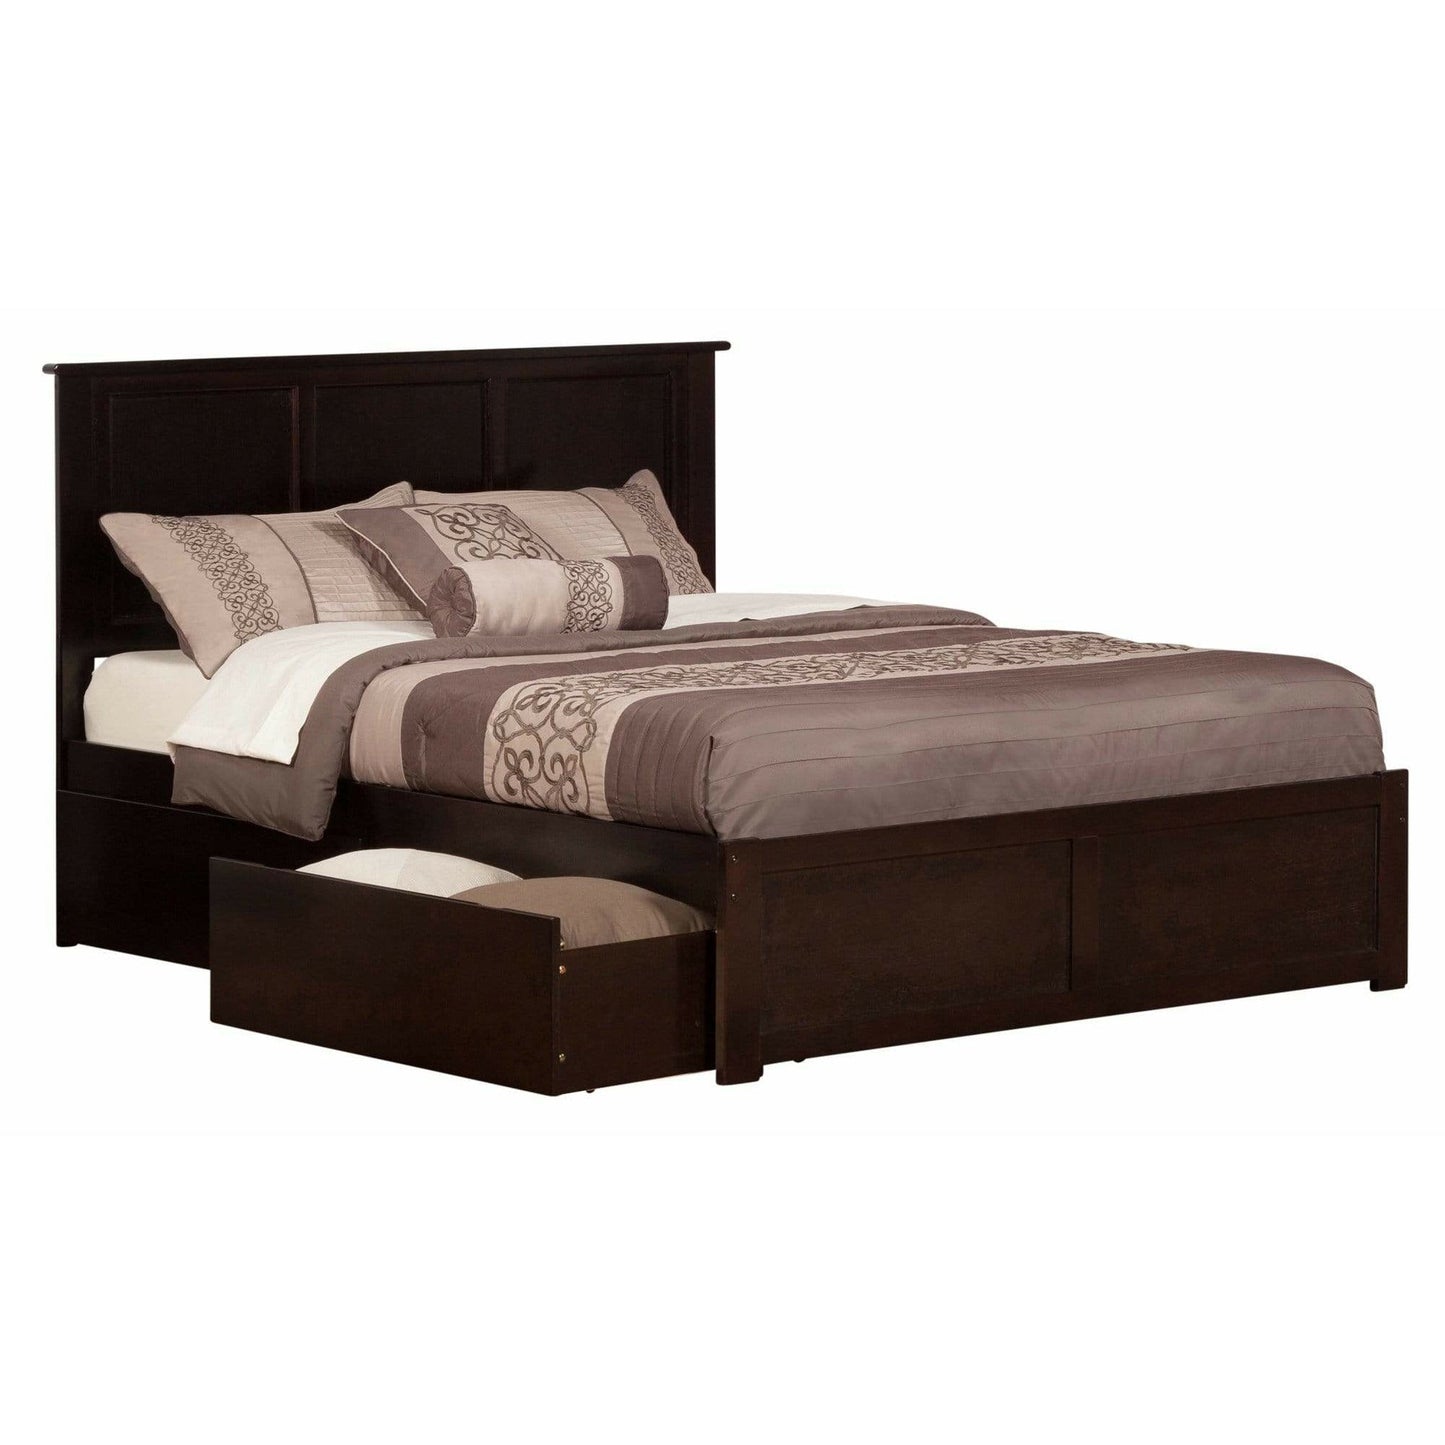 Atlantic Furniture Bed Espresso Madison Queen Platform Bed with Flat Panel Foot Board and 2 Urban Bed Drawers in Espresso